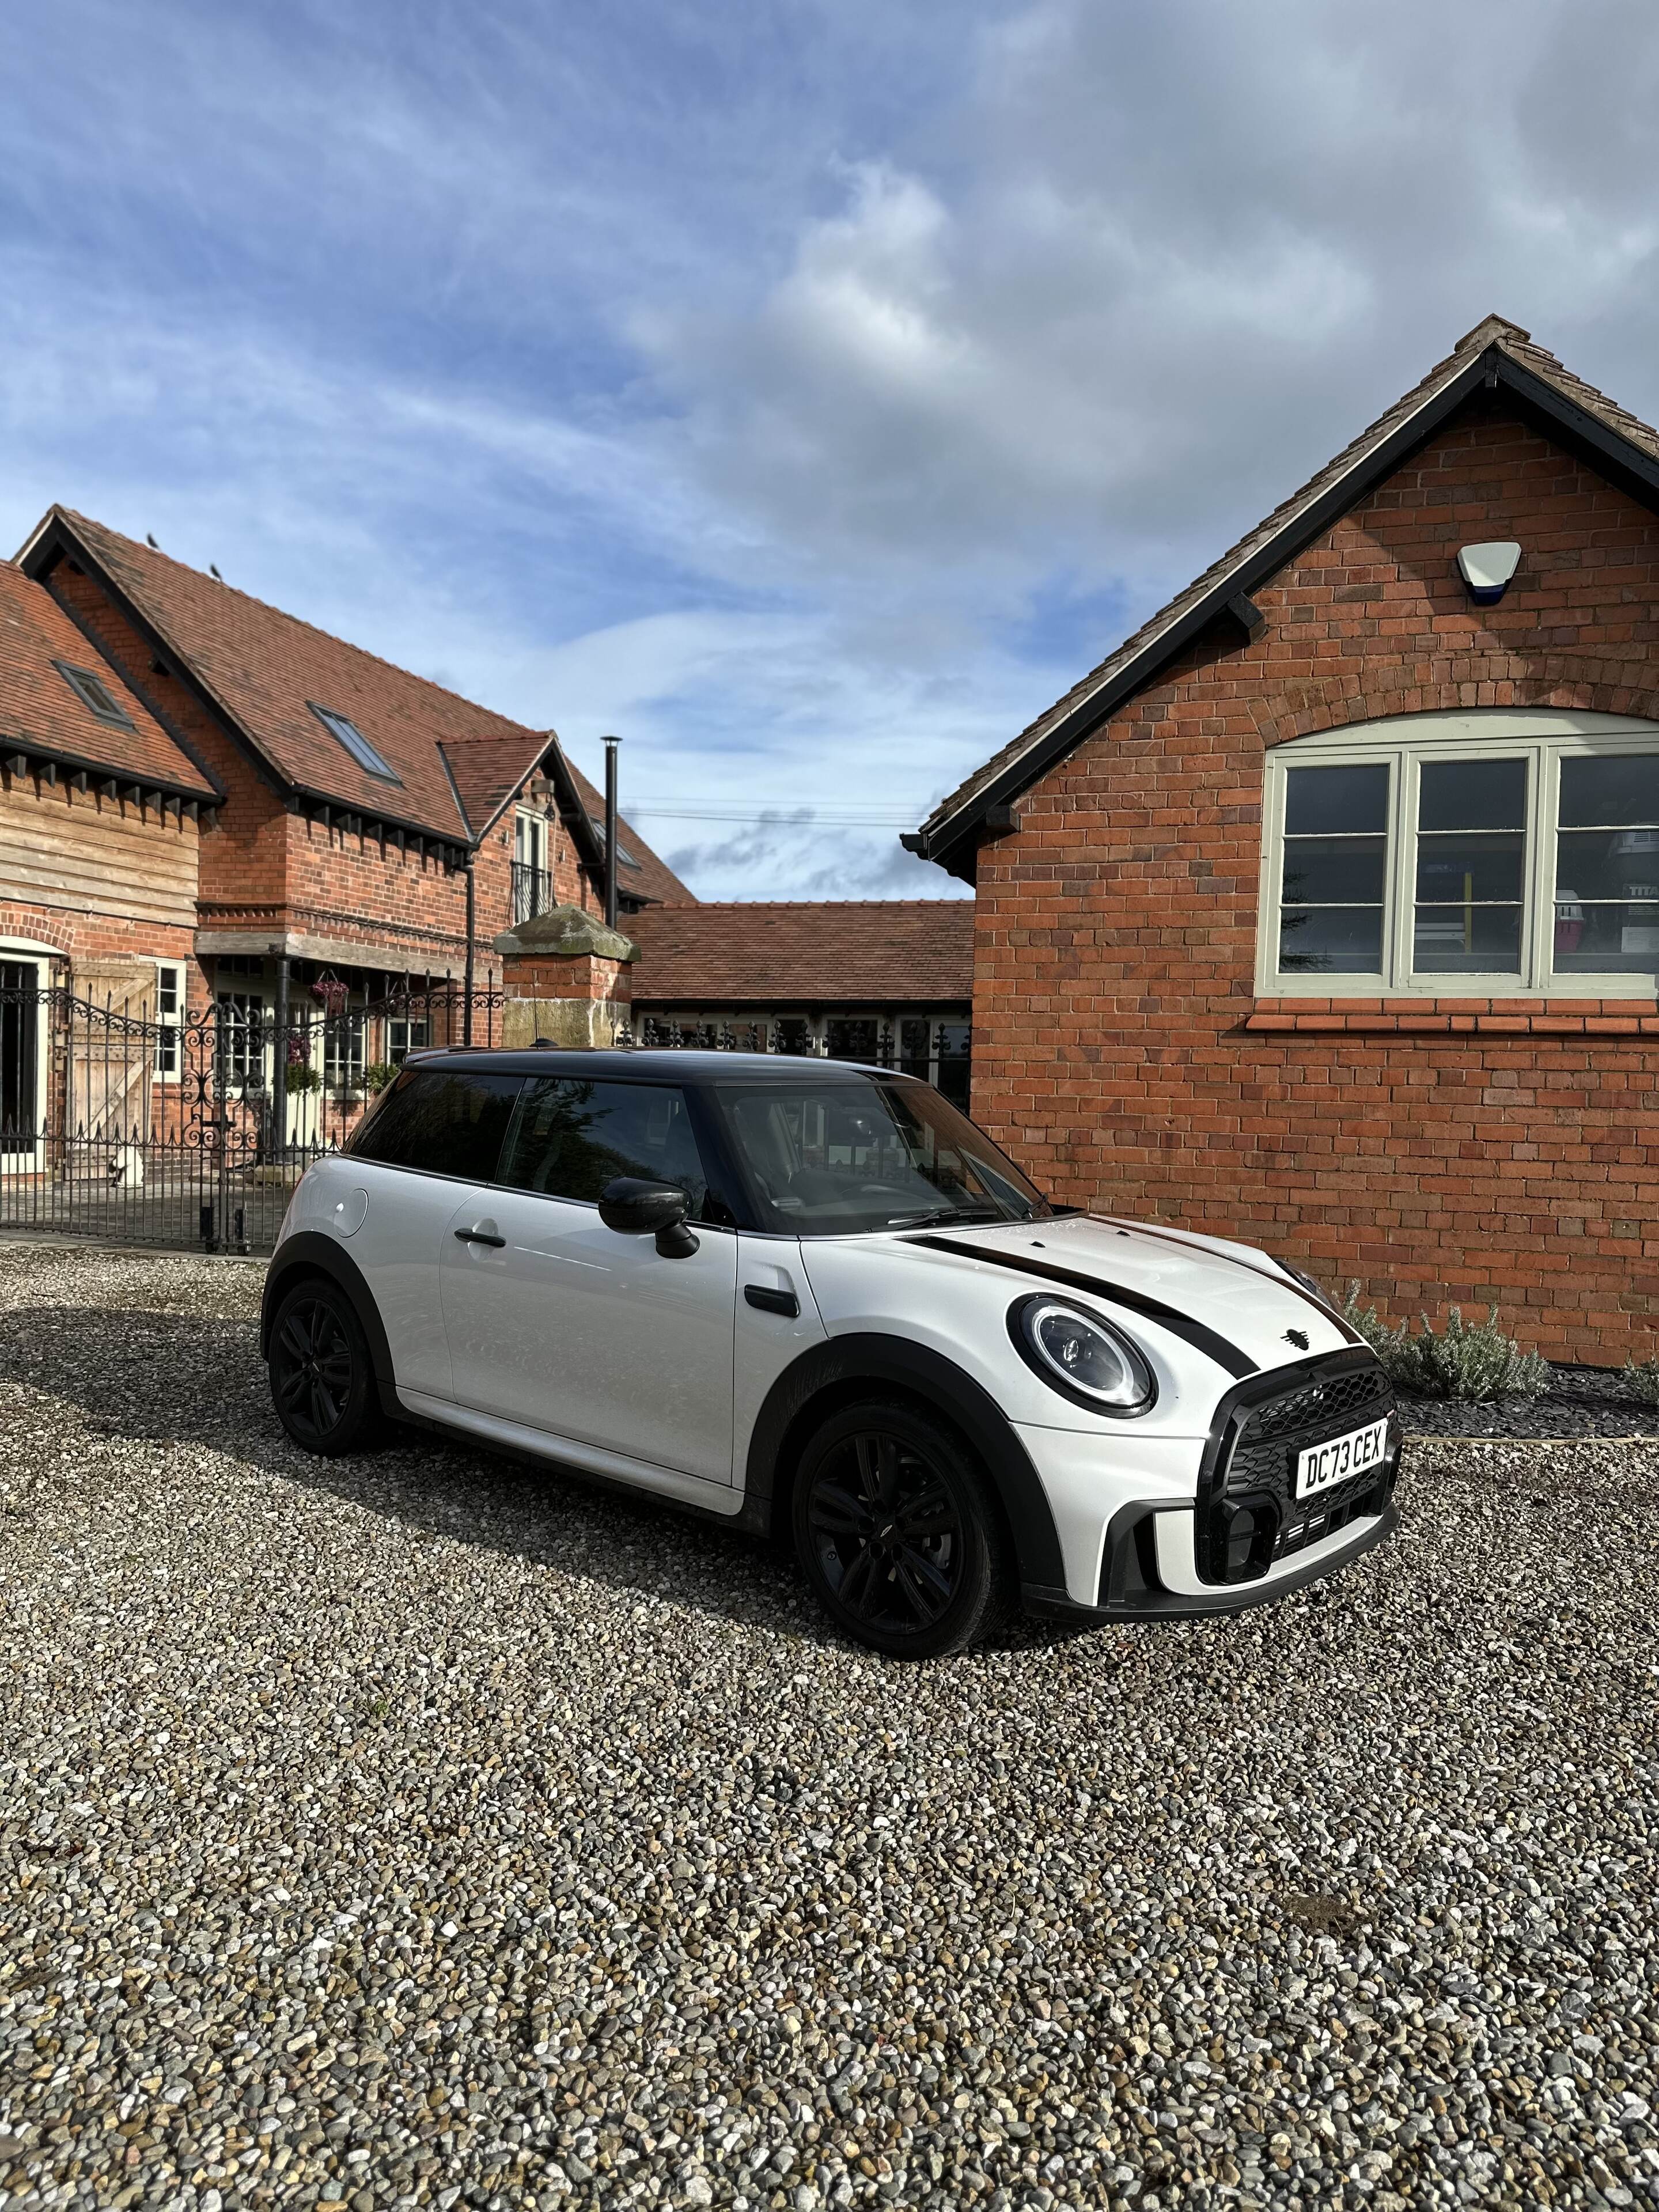 Pistonheads - The image shows a small black sports car parked on a gravel driveway. In the background, there are two-story houses with visible windows and brick chimneys. The sky is overcast with gray clouds, suggesting an overcast day. To the right of the vehicle, there's a garage with a white door. The style of the image is a real estate or lifestyle photograph, capturing the car in its surroundings and providing context about where it might be located.